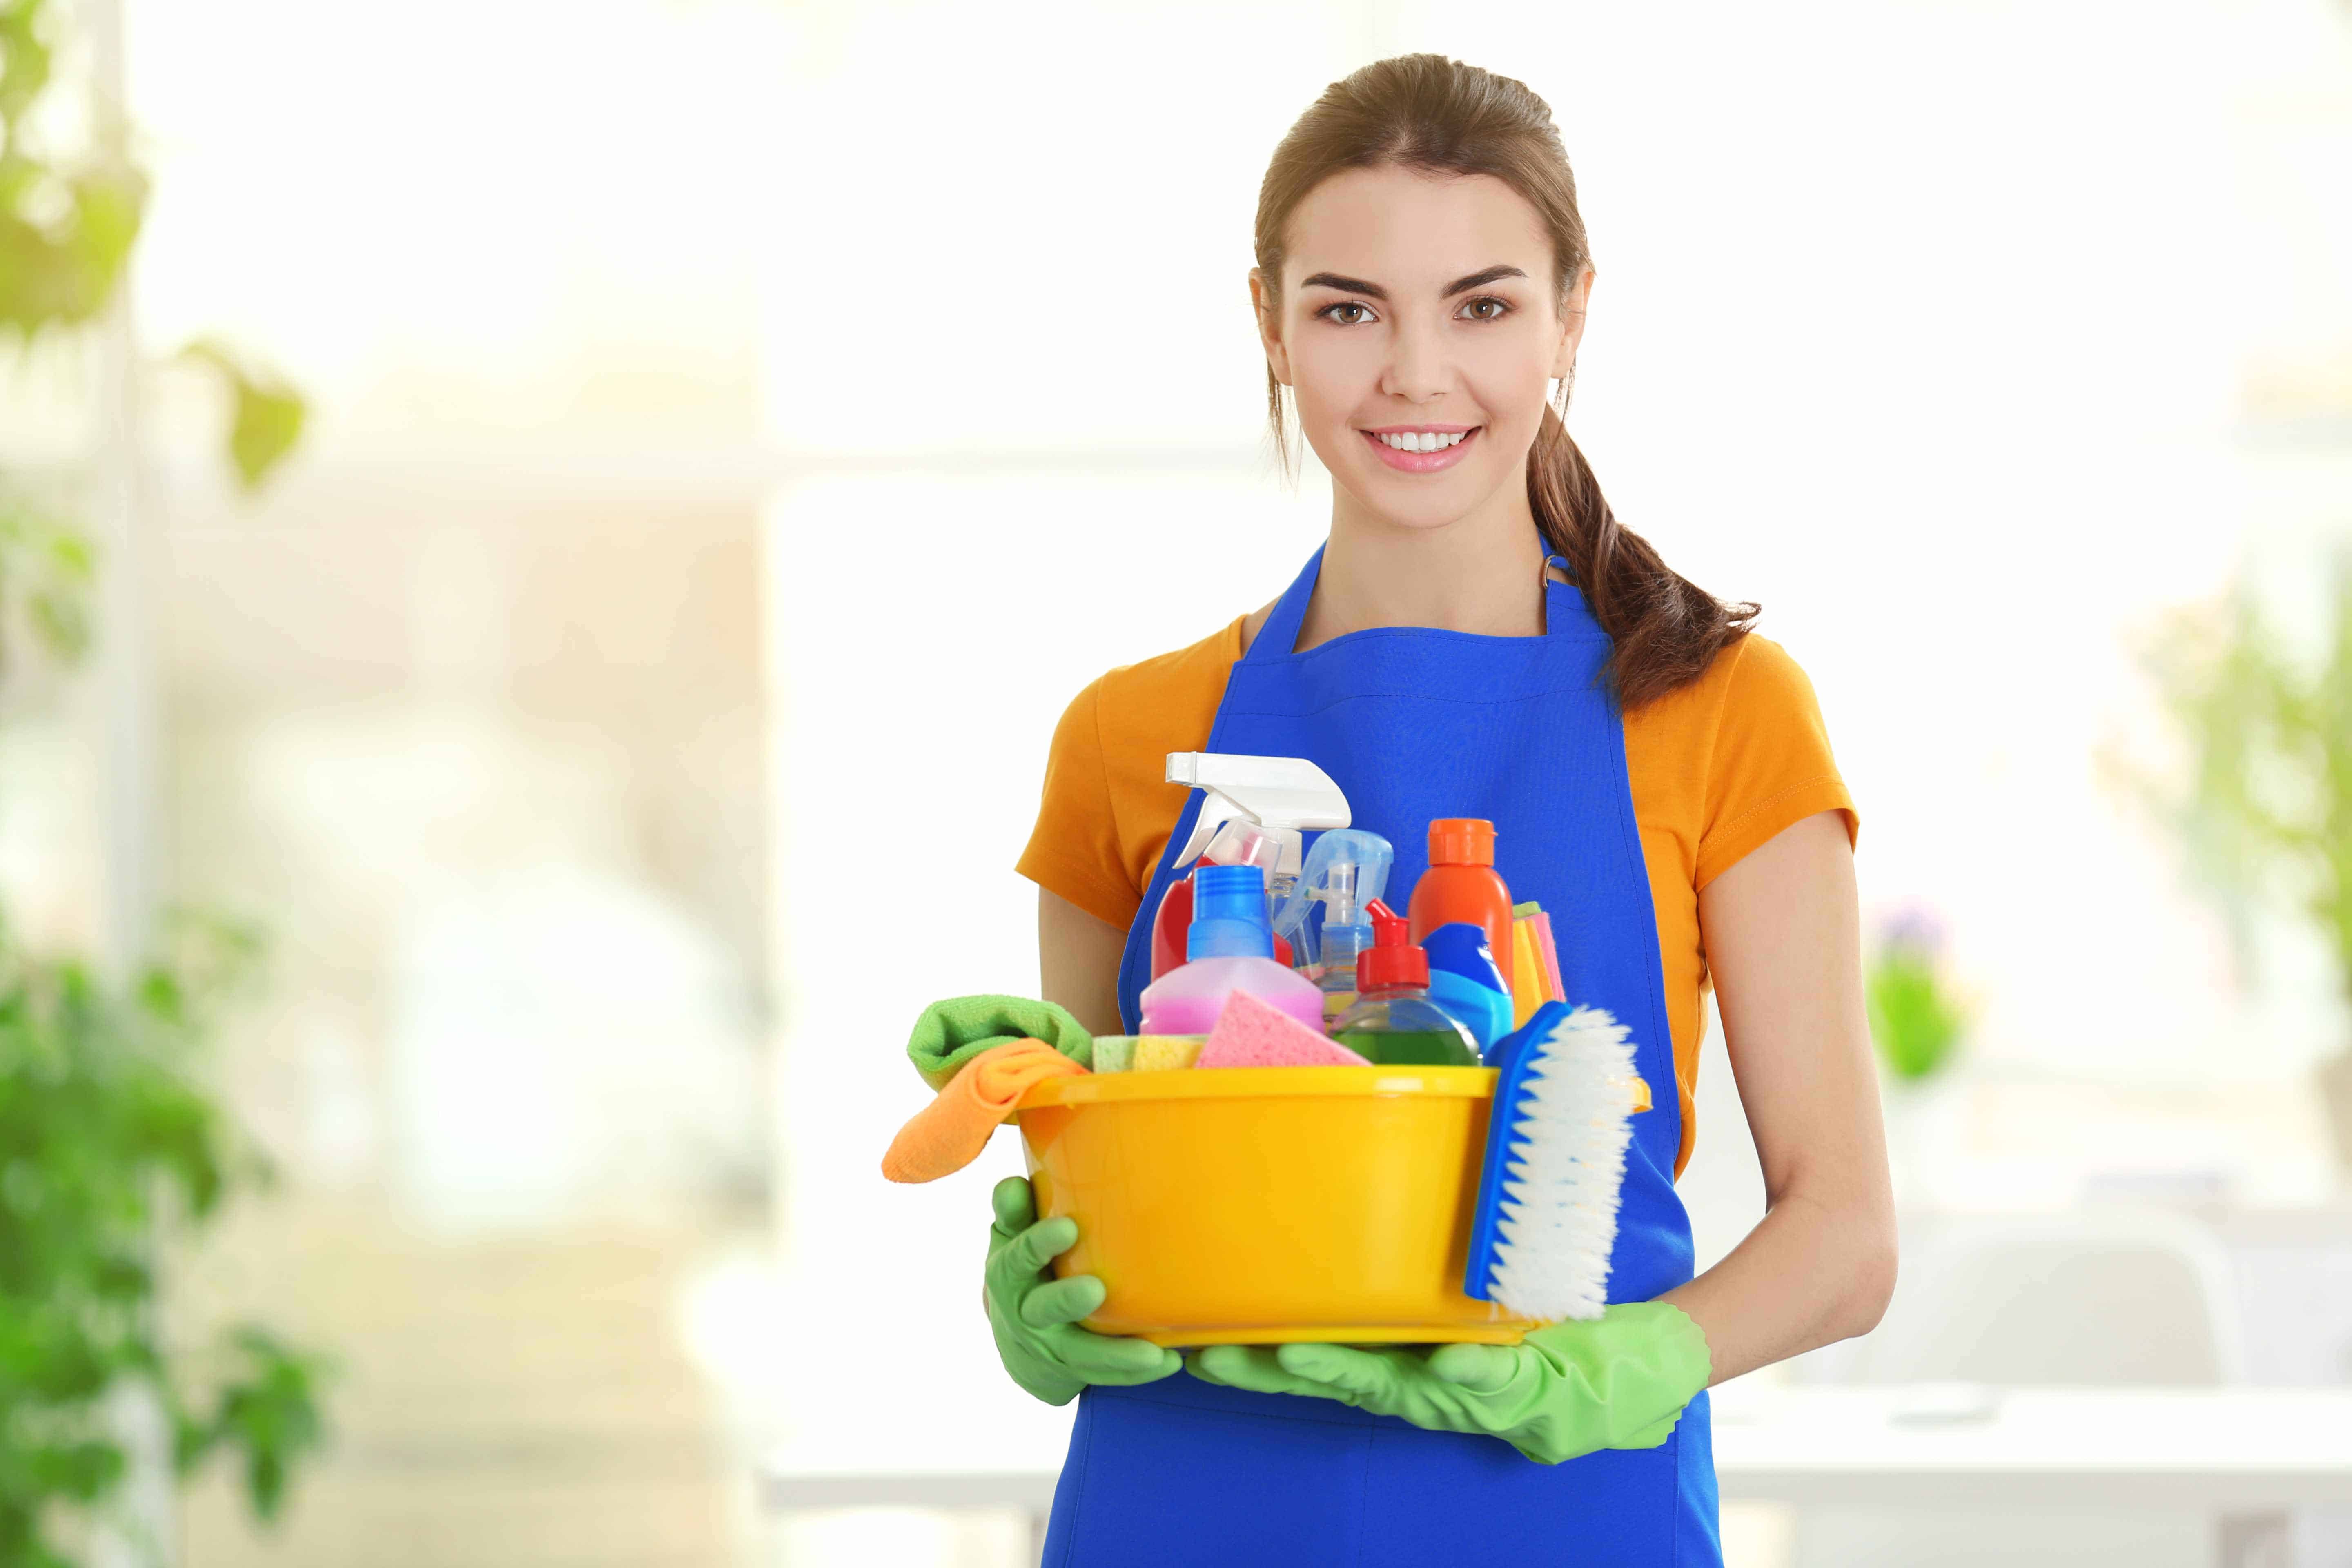 Cleaning services and supplies business for sale $149,900